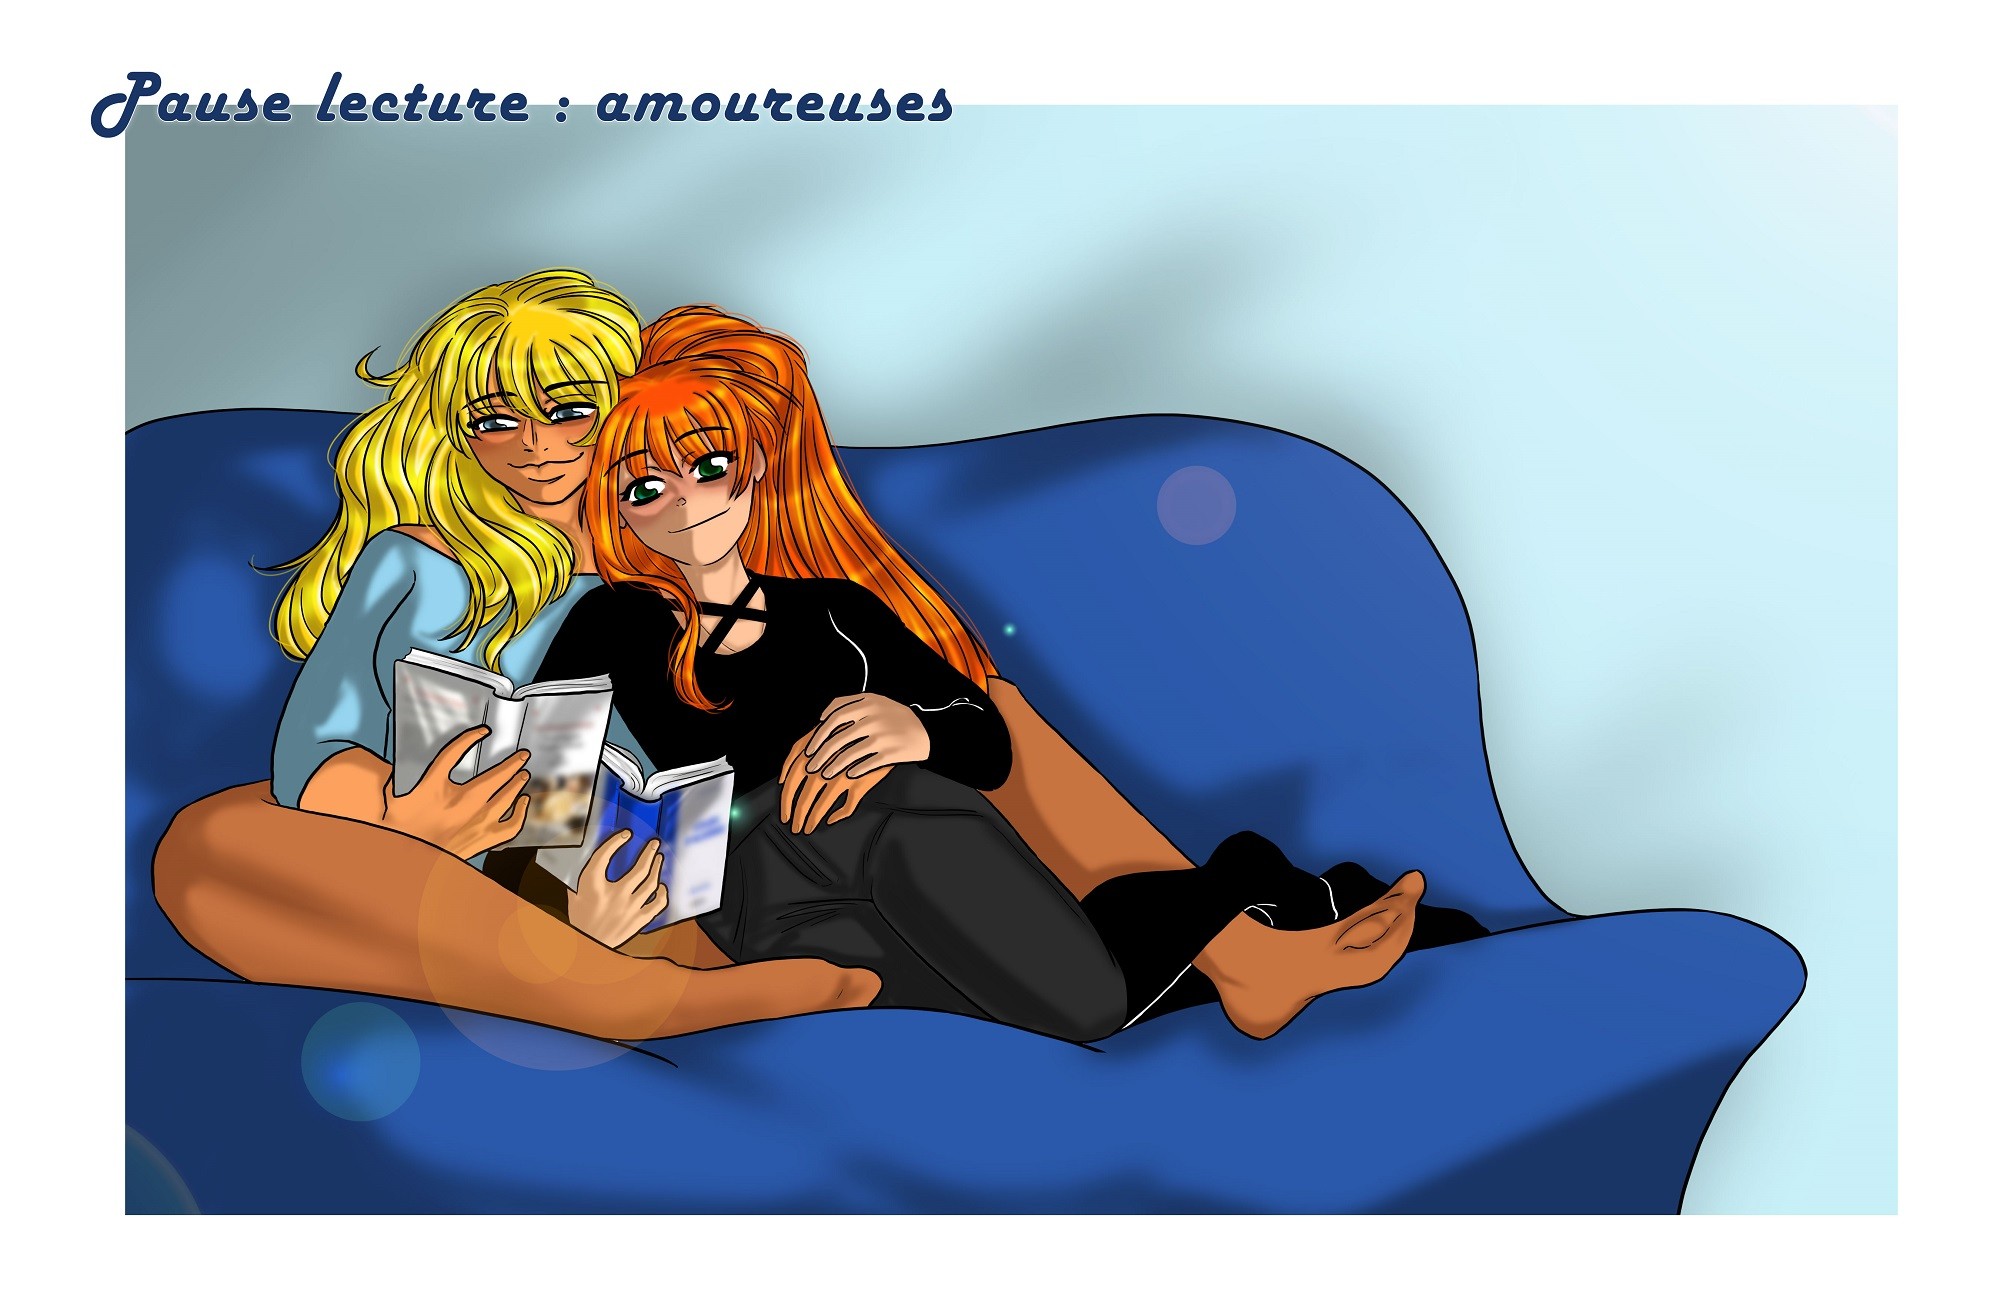 Pause lecture : amoureuses